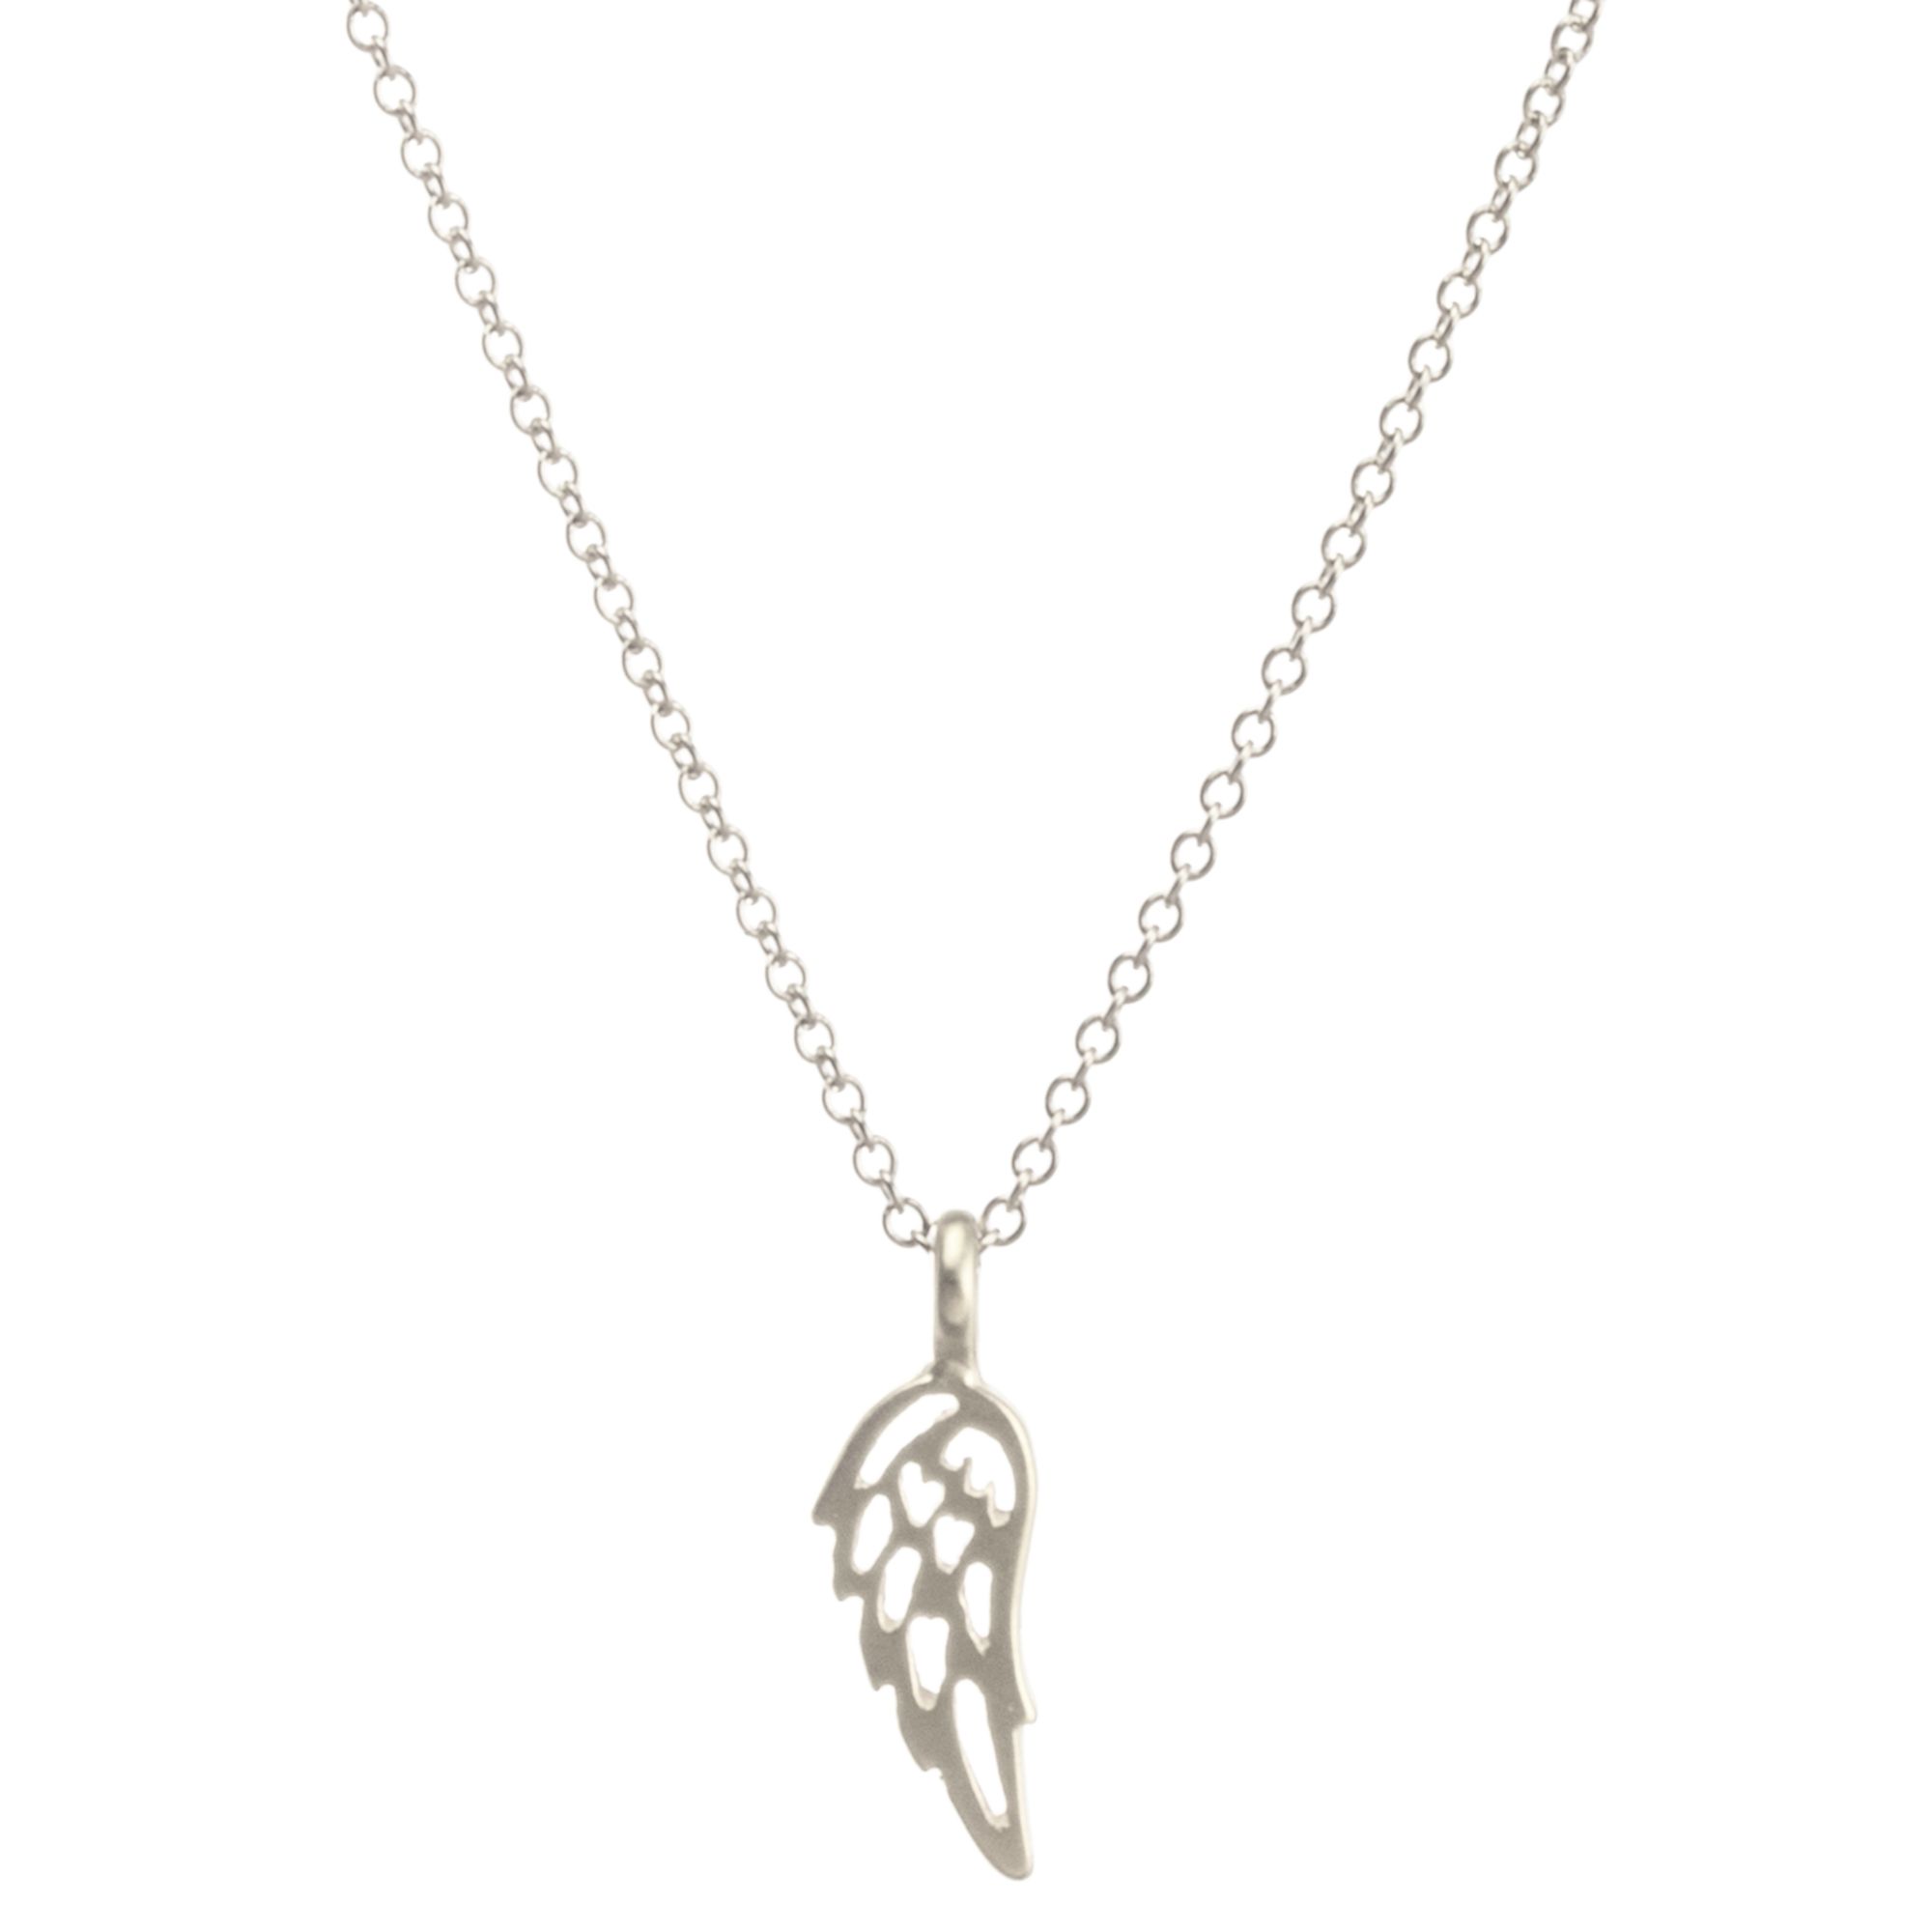 Dogeared Angel Wing Pendant Necklace, Silver